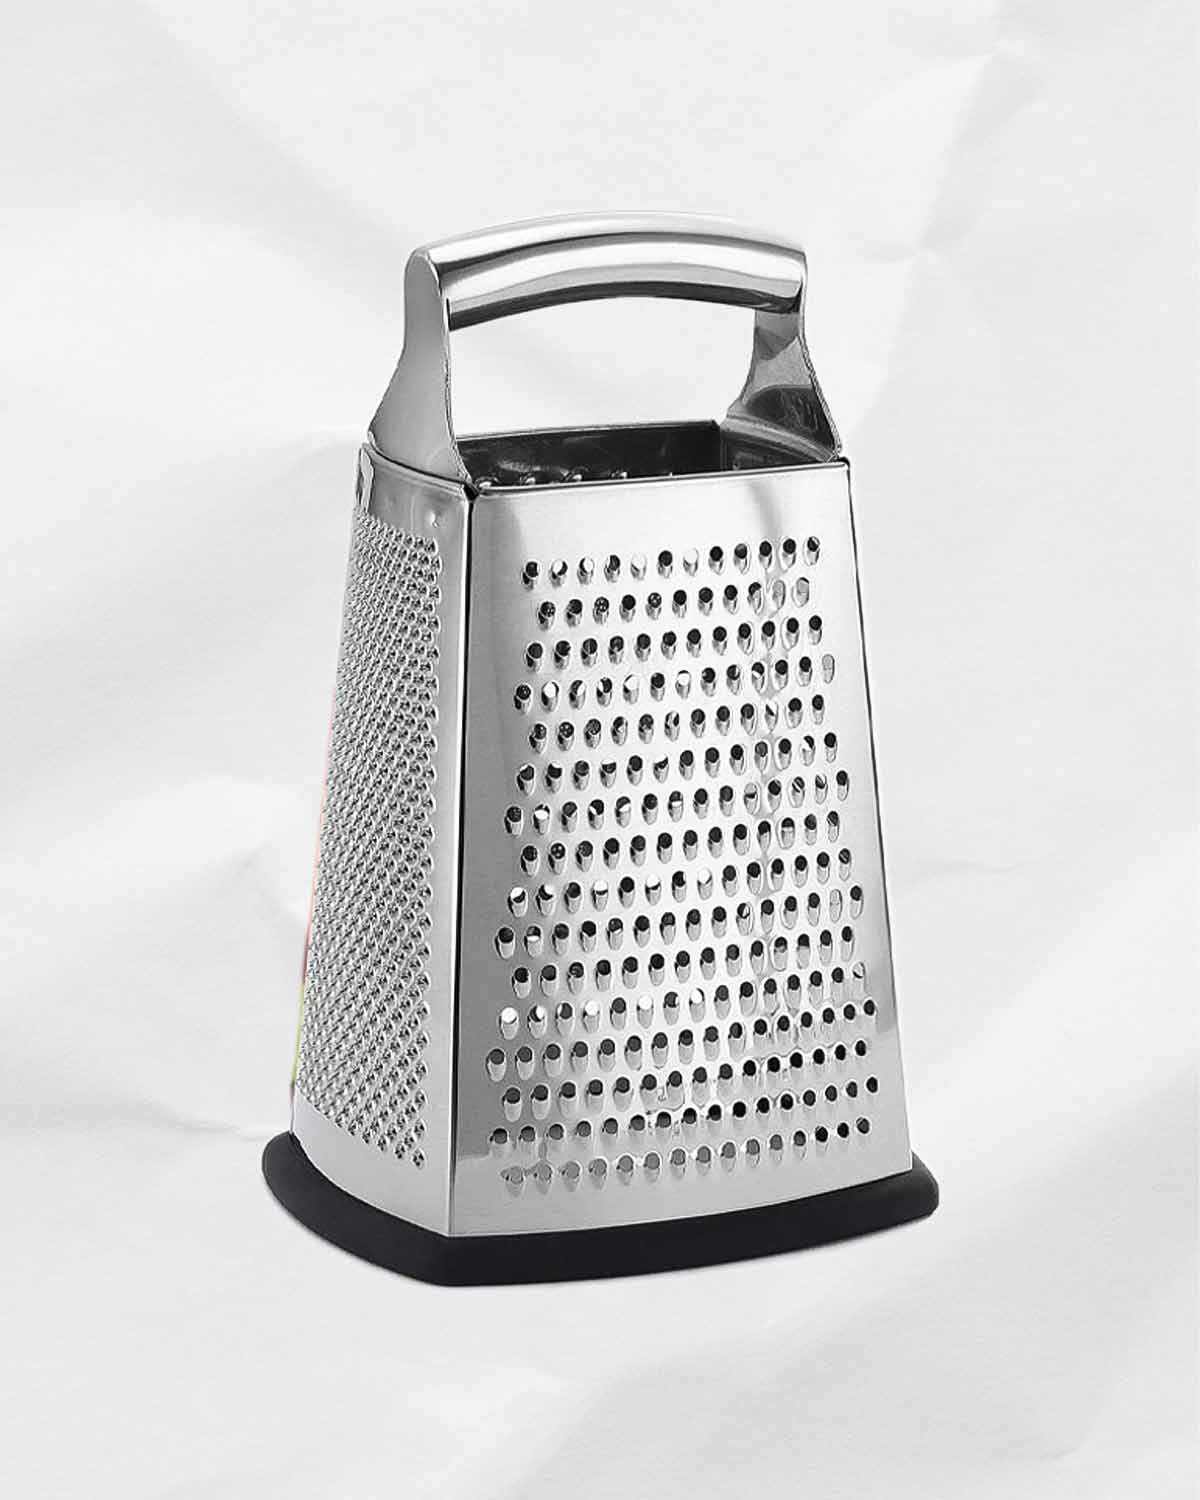 A stainless steel box grater for the writing 'how to use all four sides of your box grater'.